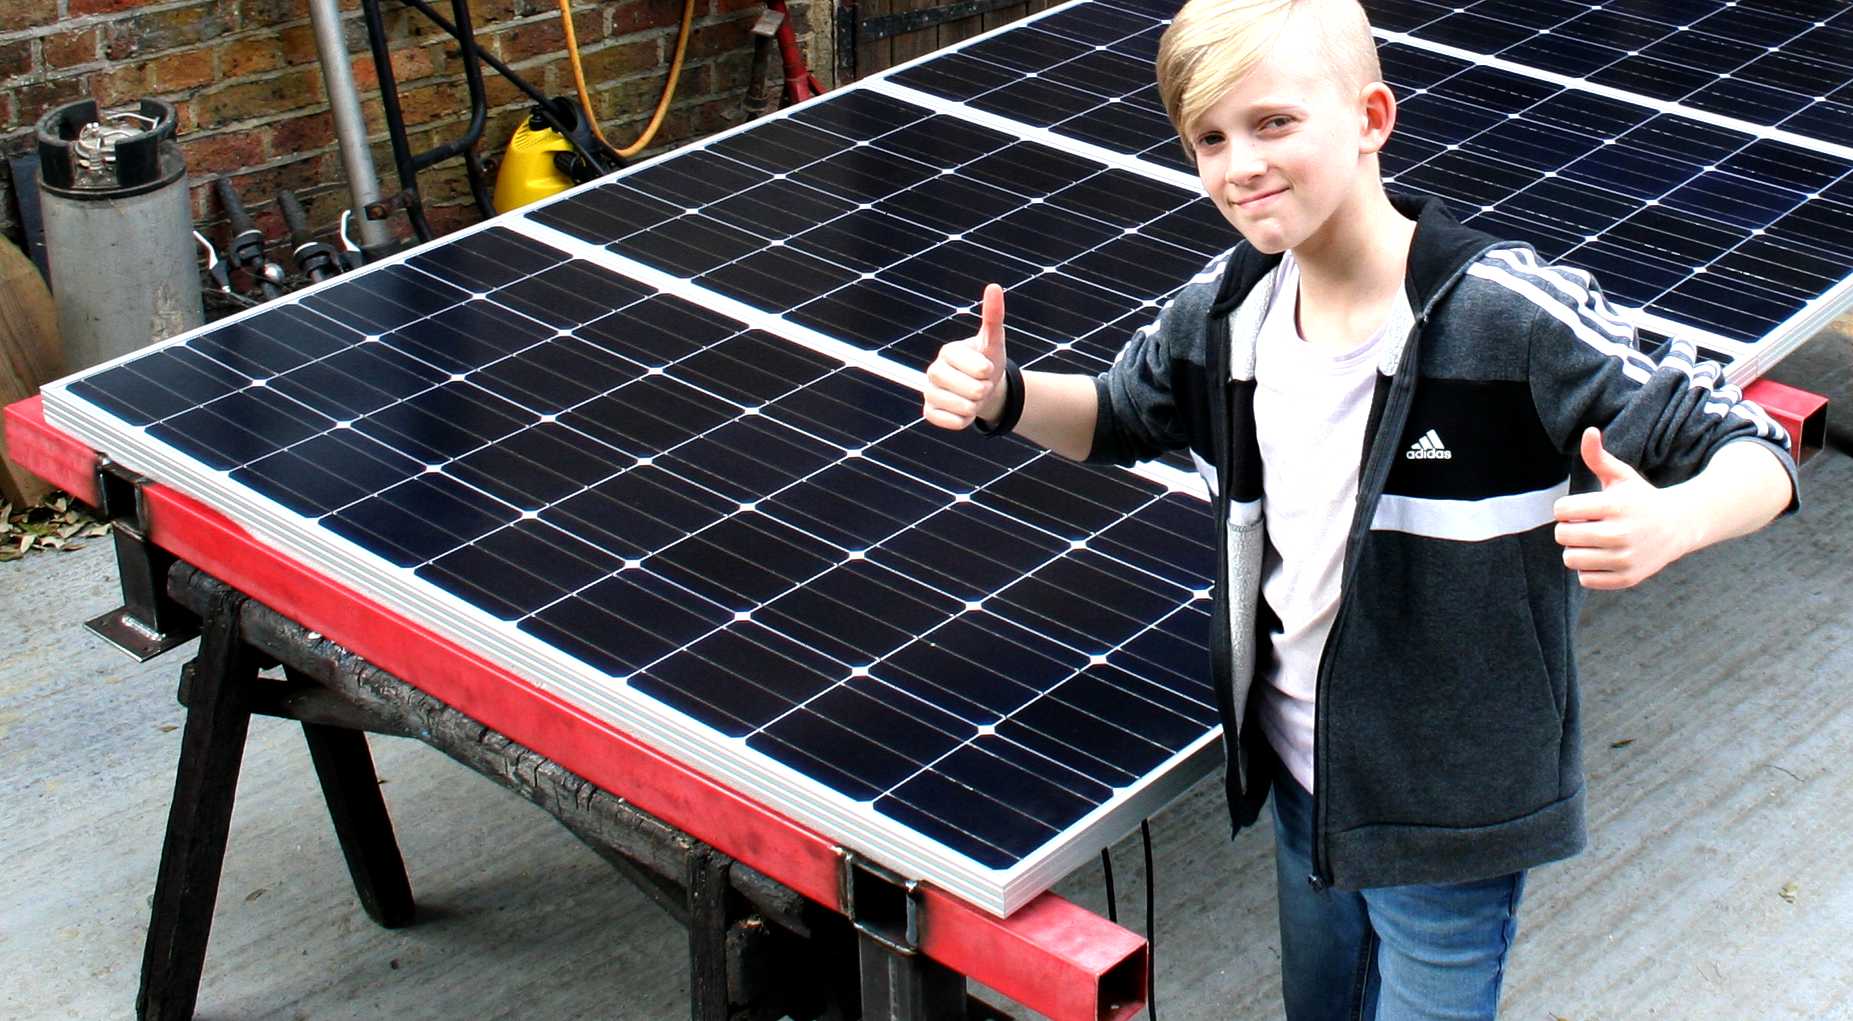 Ryan Dusart likes solar power because it is clean renewable energy